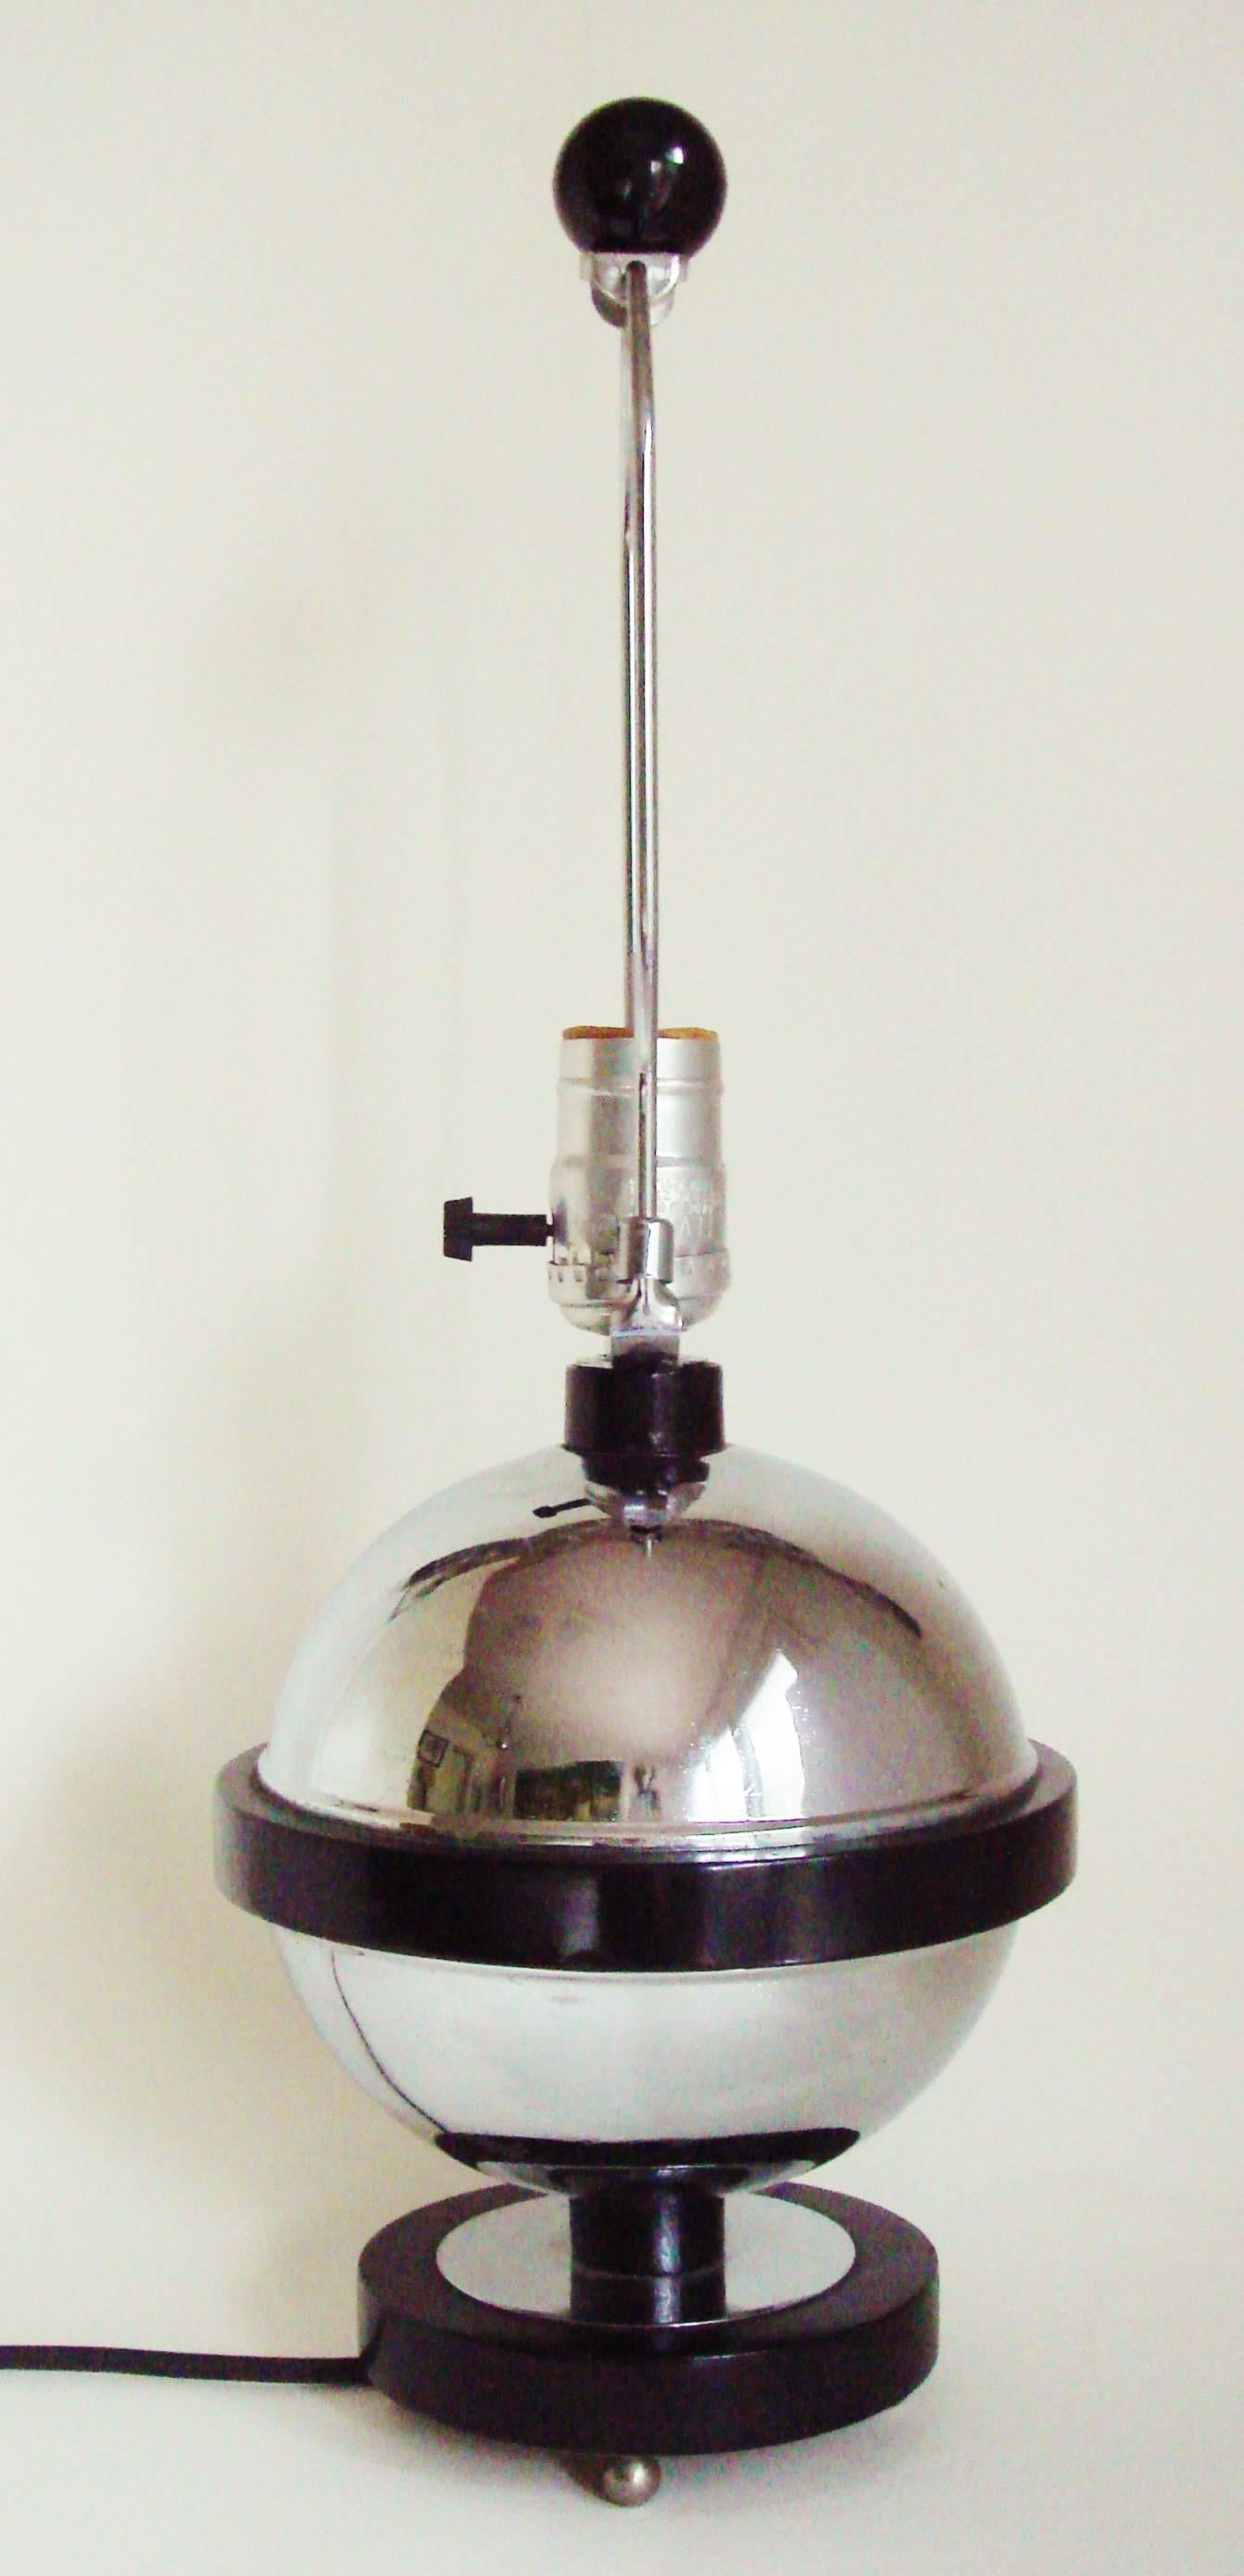 Mid-20th Century American Art Deco Chrome, Black Lacquered Wood and Bakelite Saturn Table Lamp